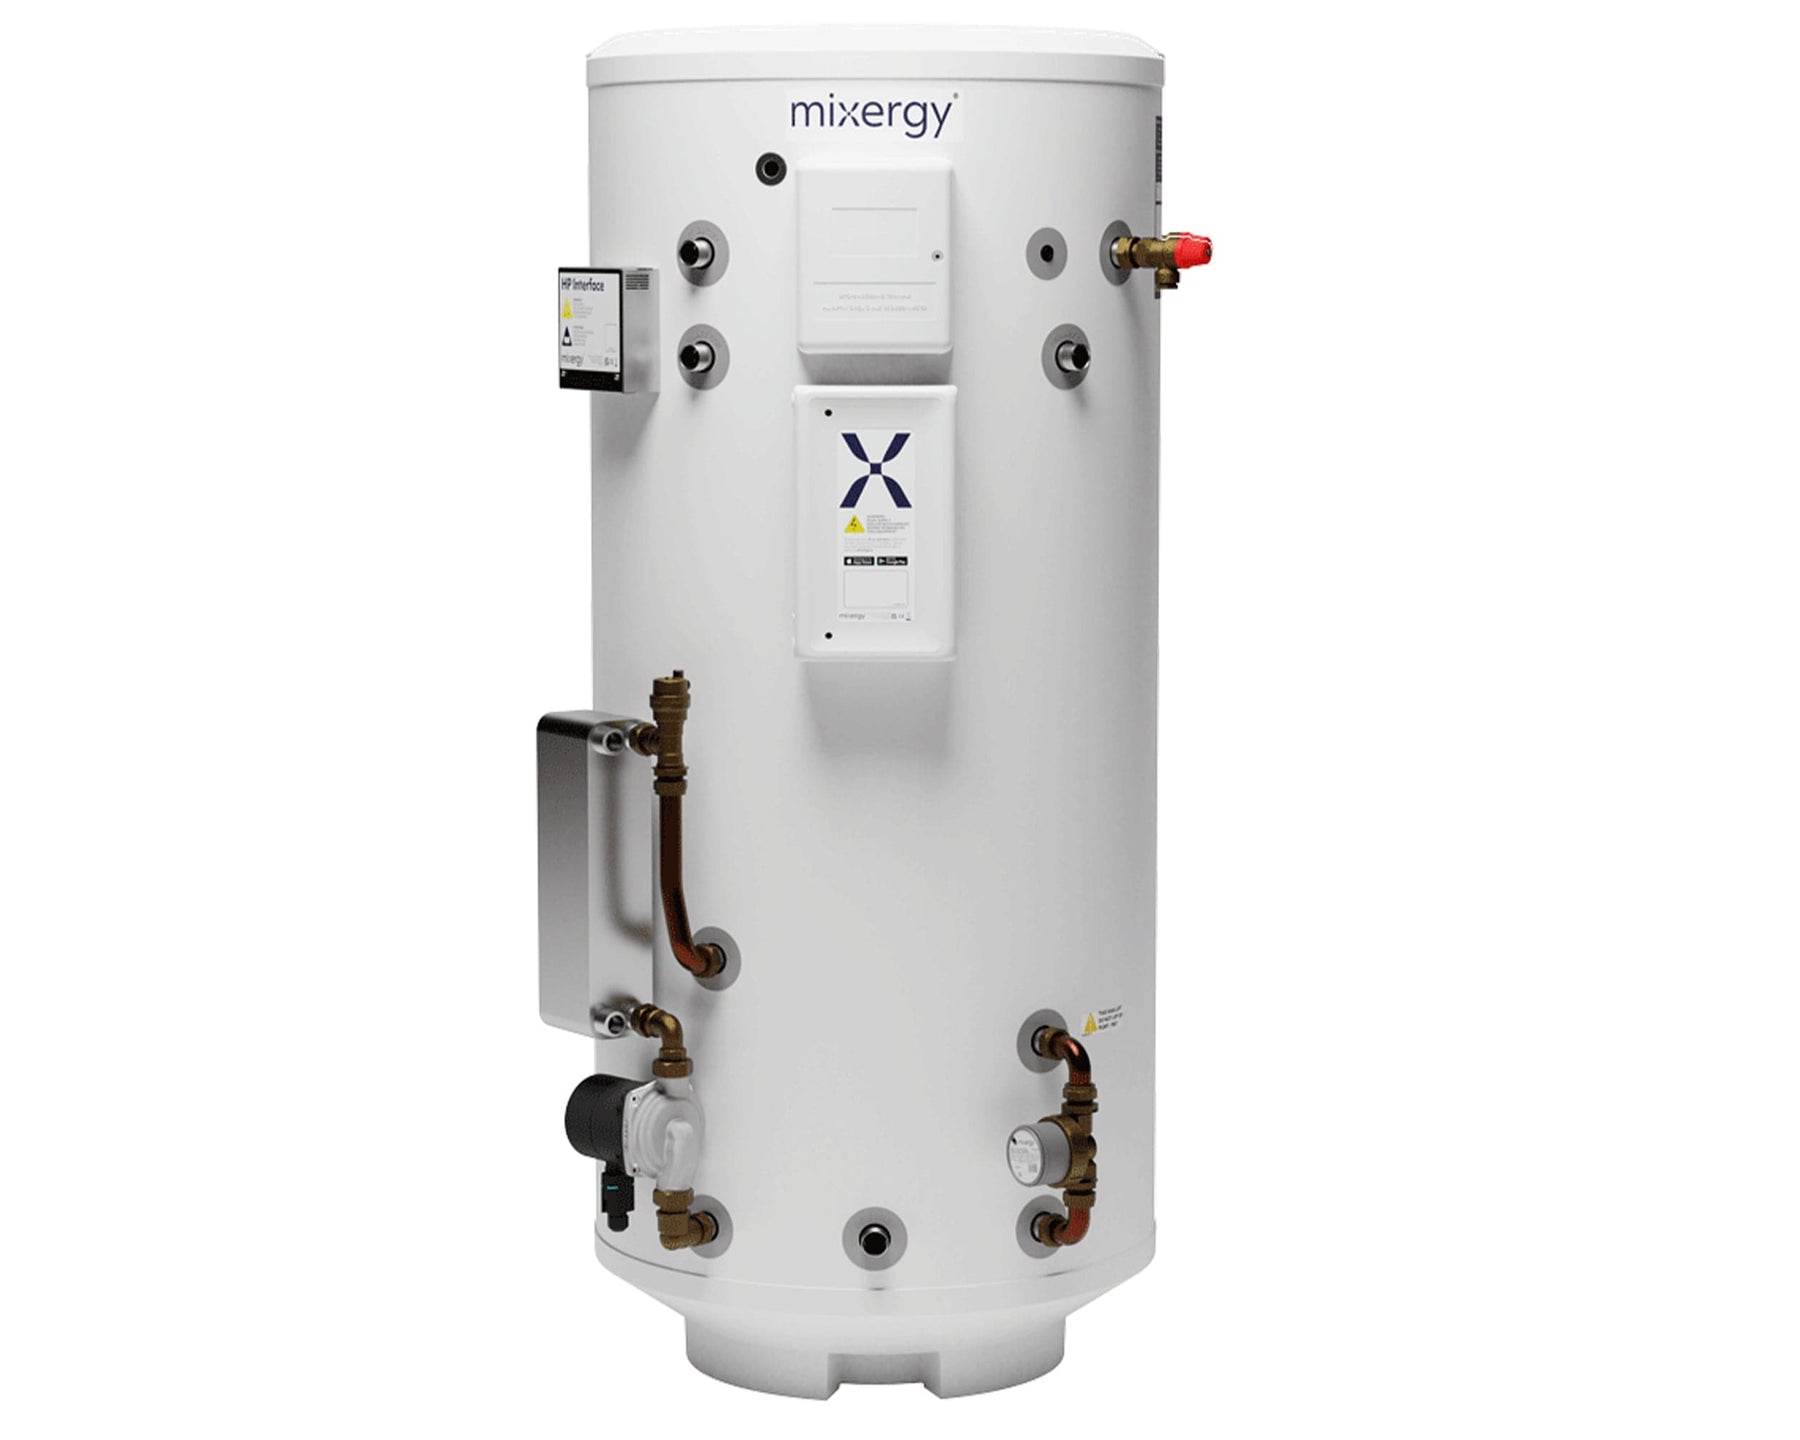 Mixergy Direct Unvented Standard Smart Cylinder - 580 mm